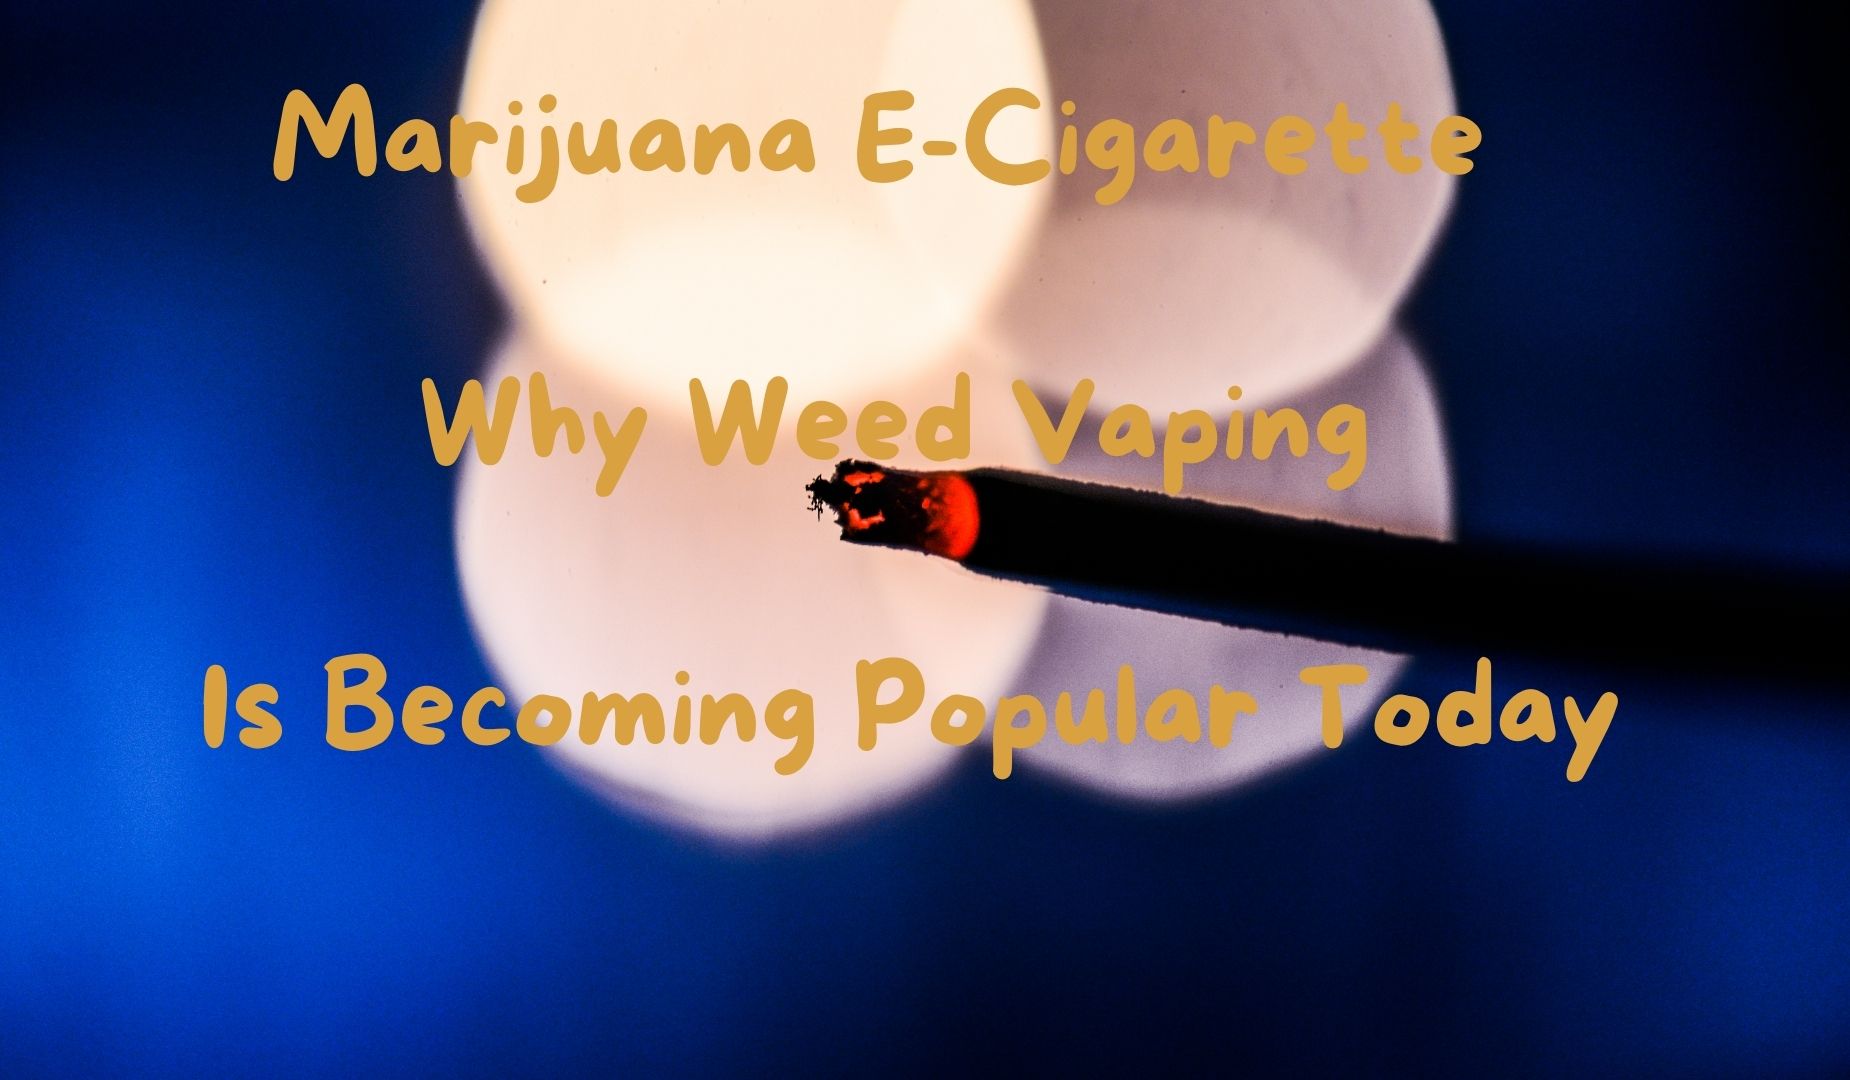 Marijuana E-Cigarette - Why Weed Vaping is Becoming Popular Today